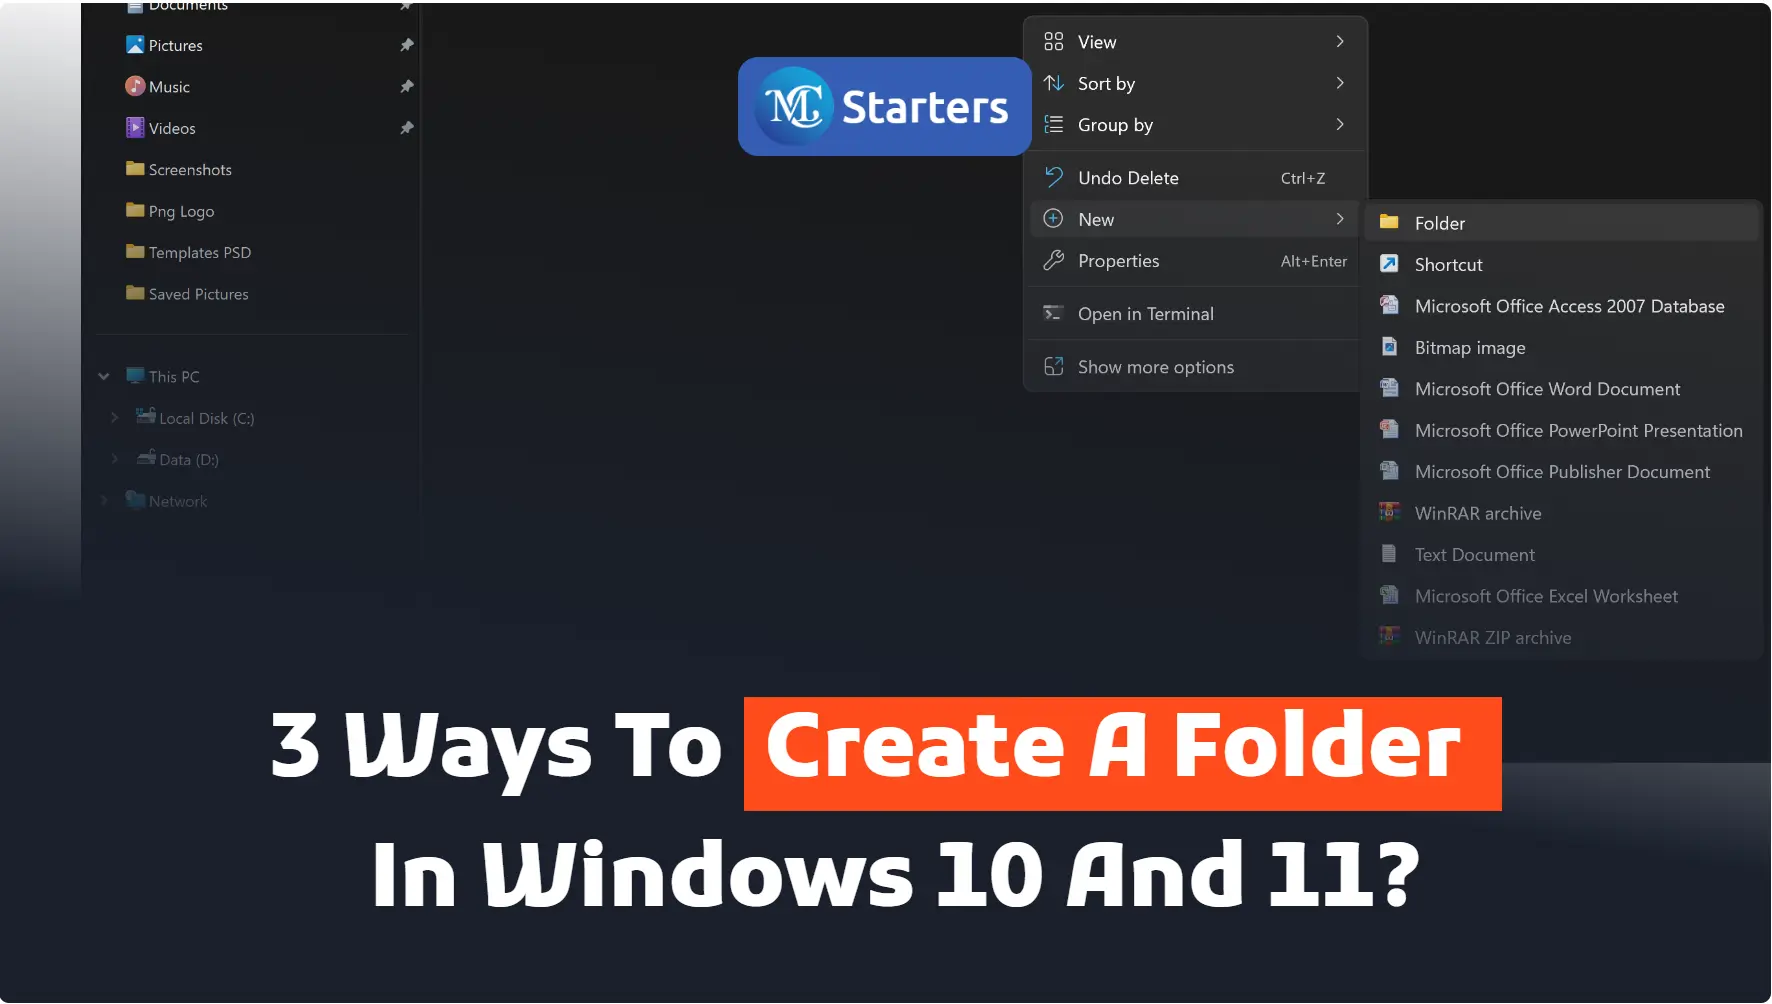 3 Ways to Create a Folder in Windows 10 and 11? 